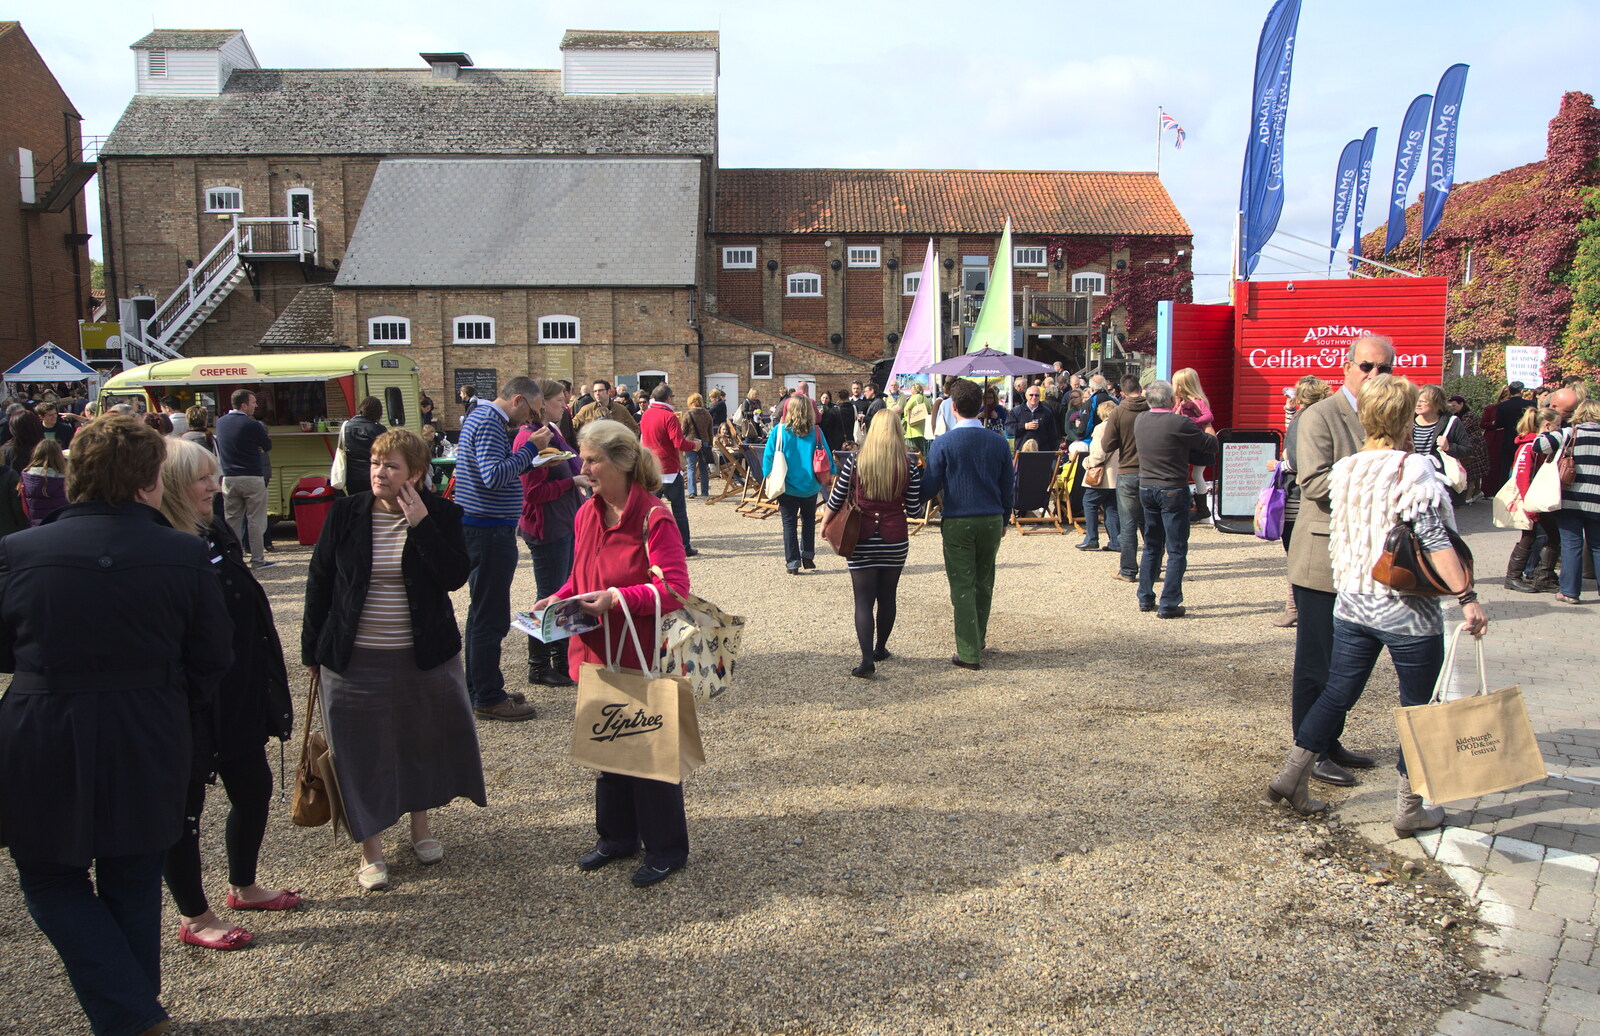 Crowds mill around from The Aldeburgh Food Festival, Aldeburgh, Suffolk - 30th September 2012